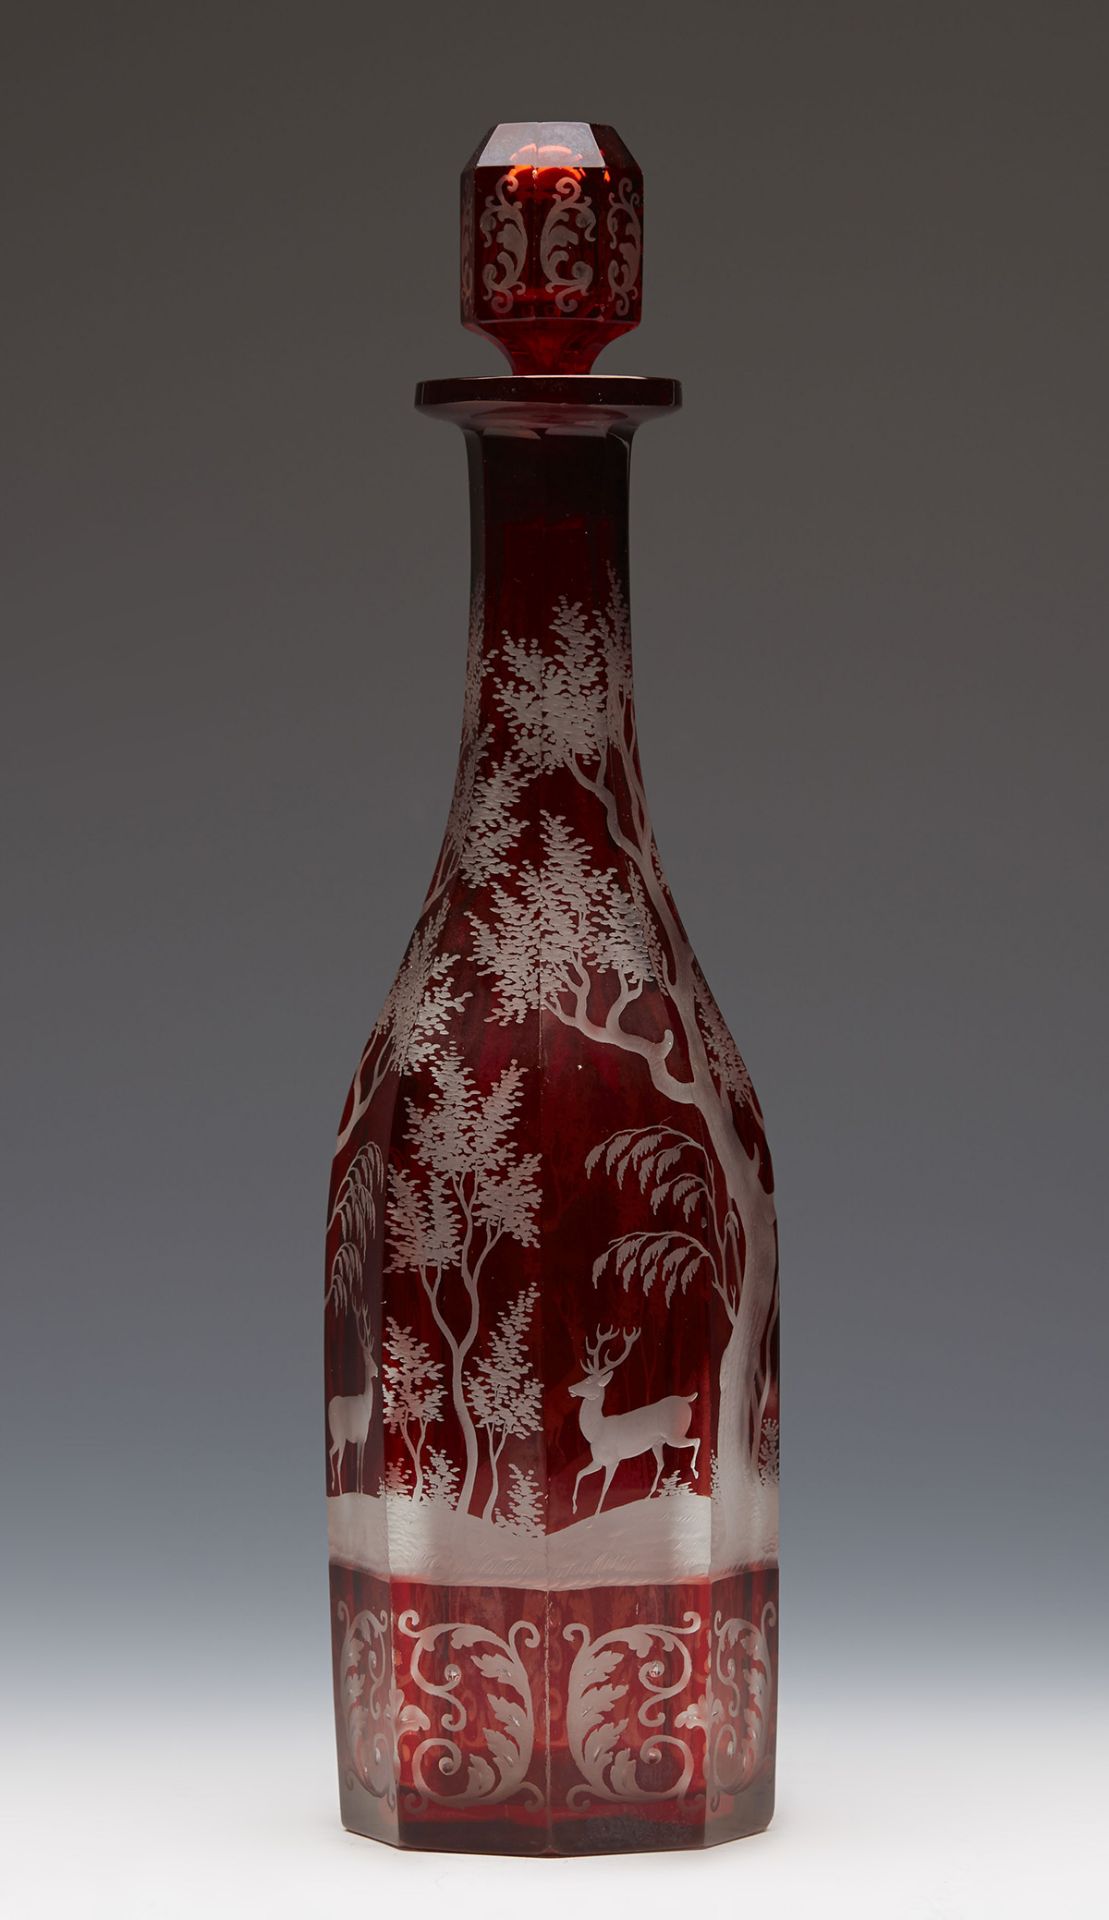 ANTIQUE BOHEMIAN RUBY ACID ETCHED SPIRIT DECANTER 19TH C. - Image 8 of 8